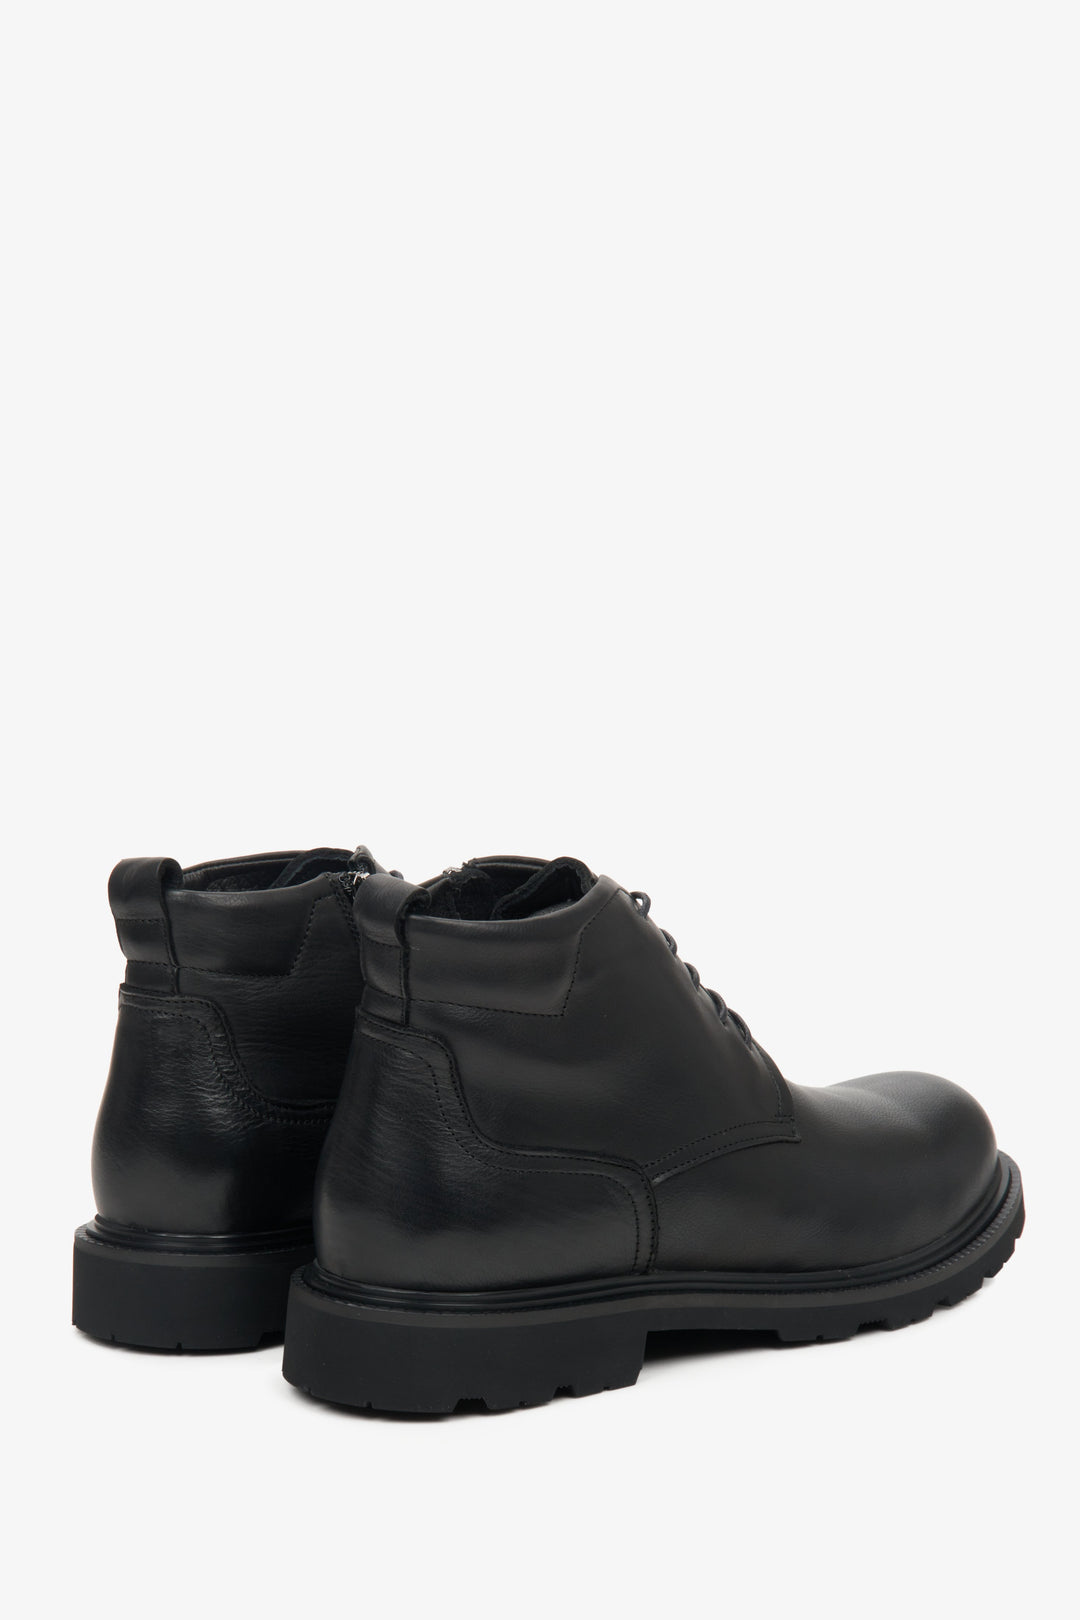 Black men's leather winter boots by Estro - close-up on the side welt and heel counter.